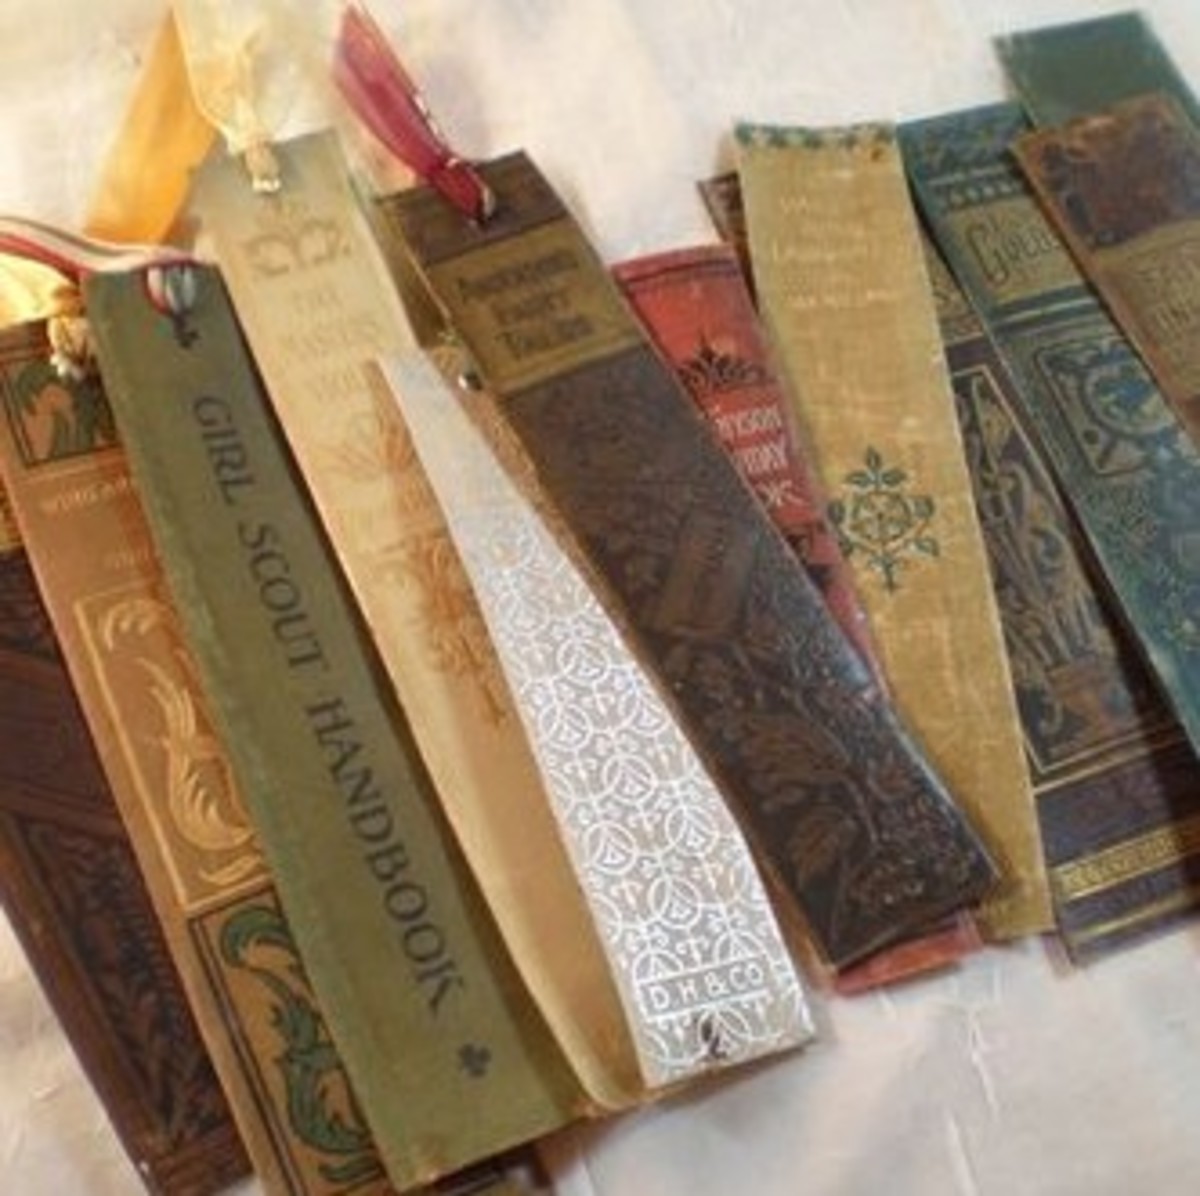 10 Crafts to Make With Book Covers | HubPages